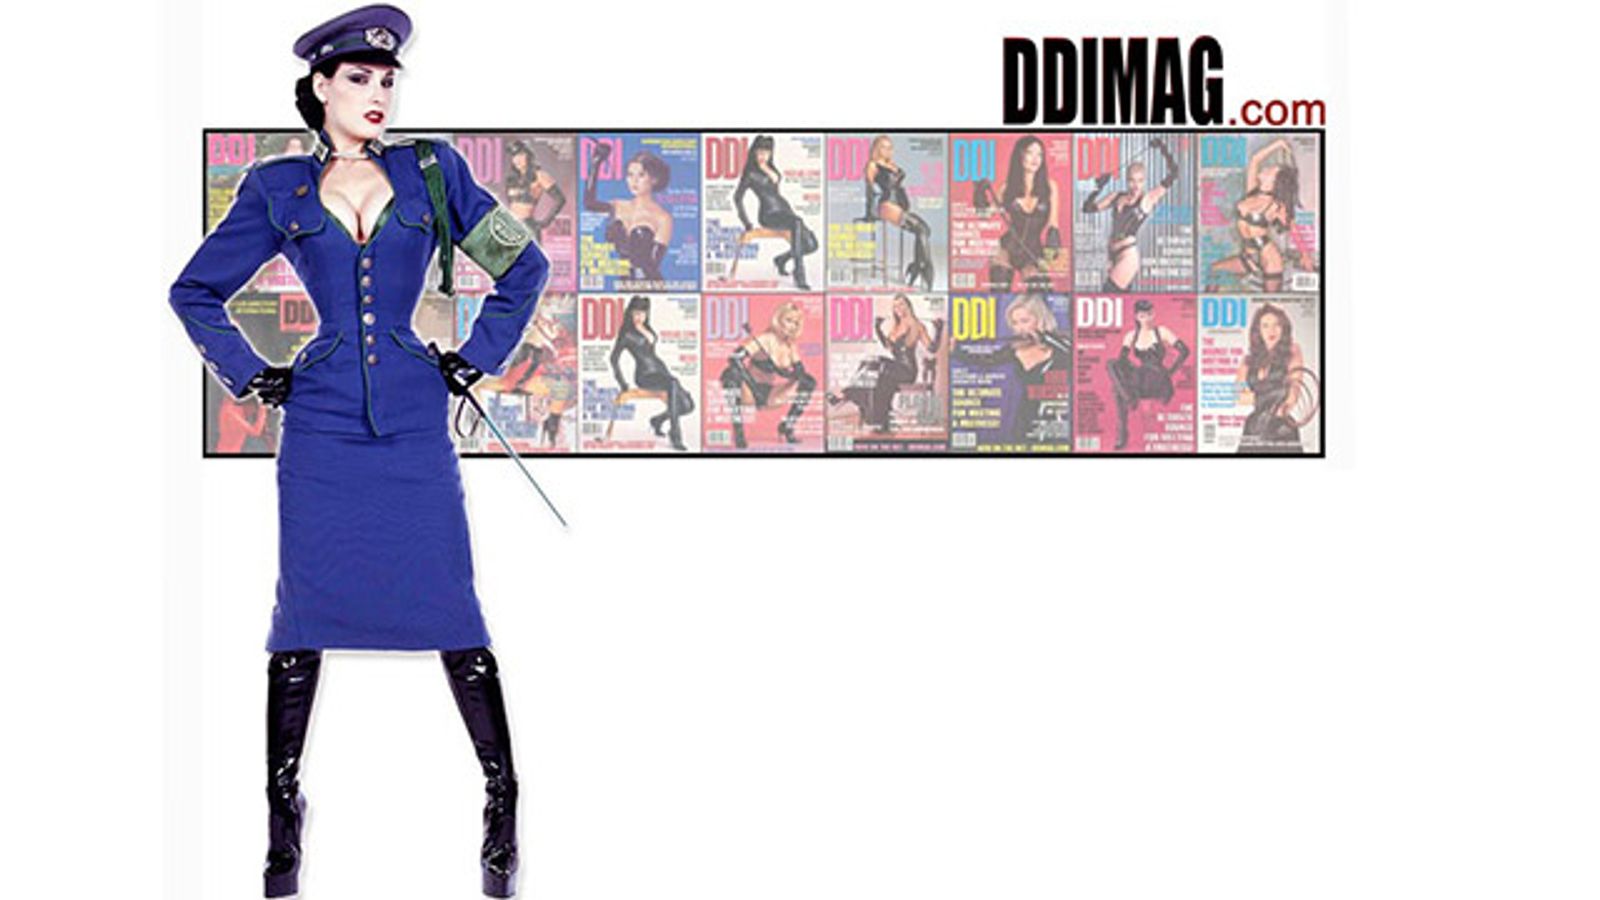 DDI Magazine Debuted New Website Look at DomCon 2015